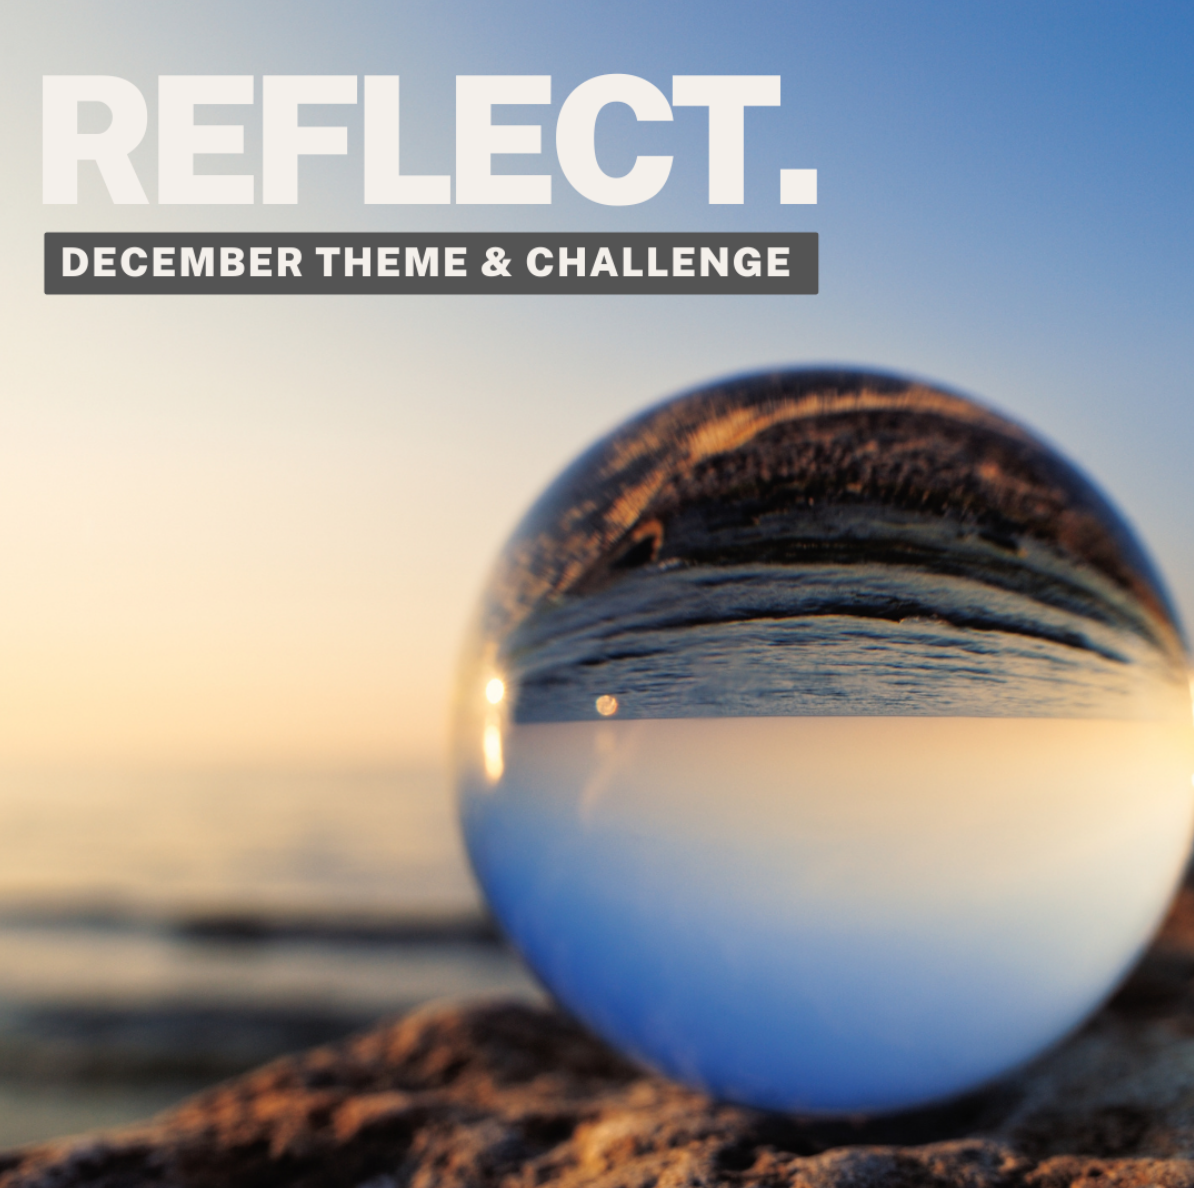 Time to reflect 12/3